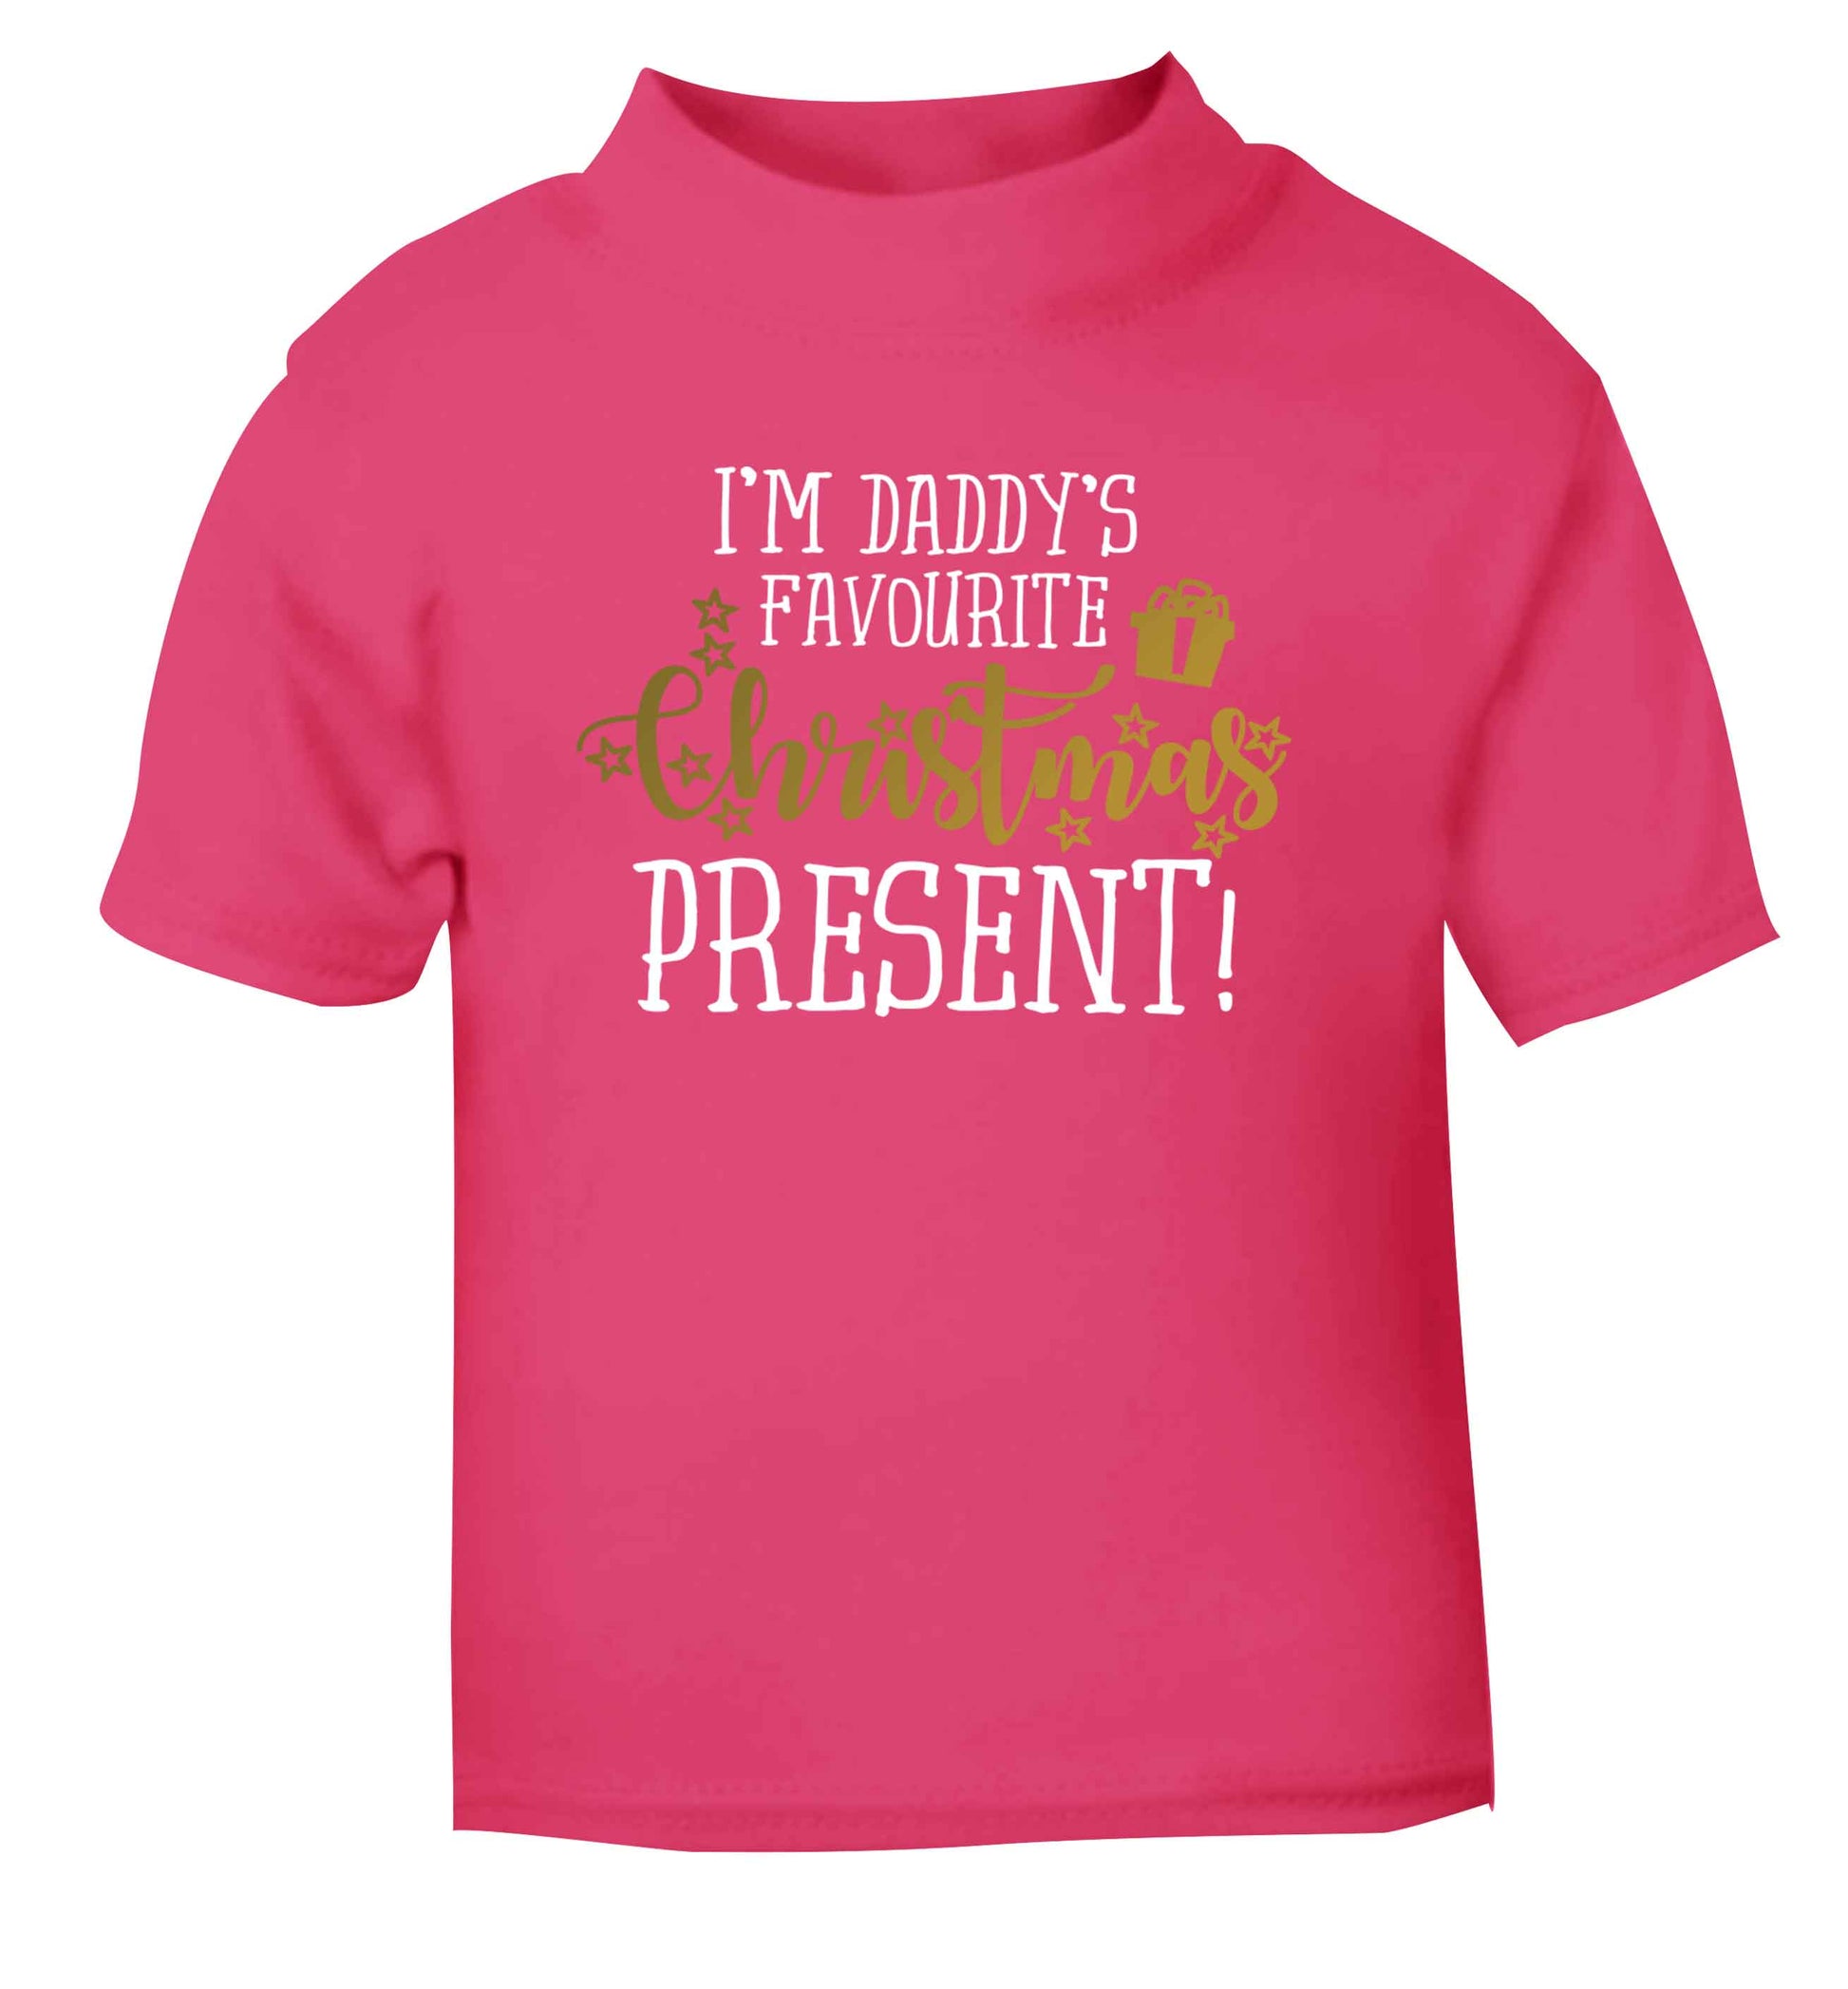 Daddy's favourite Christmas present pink Baby Toddler Tshirt 2 Years